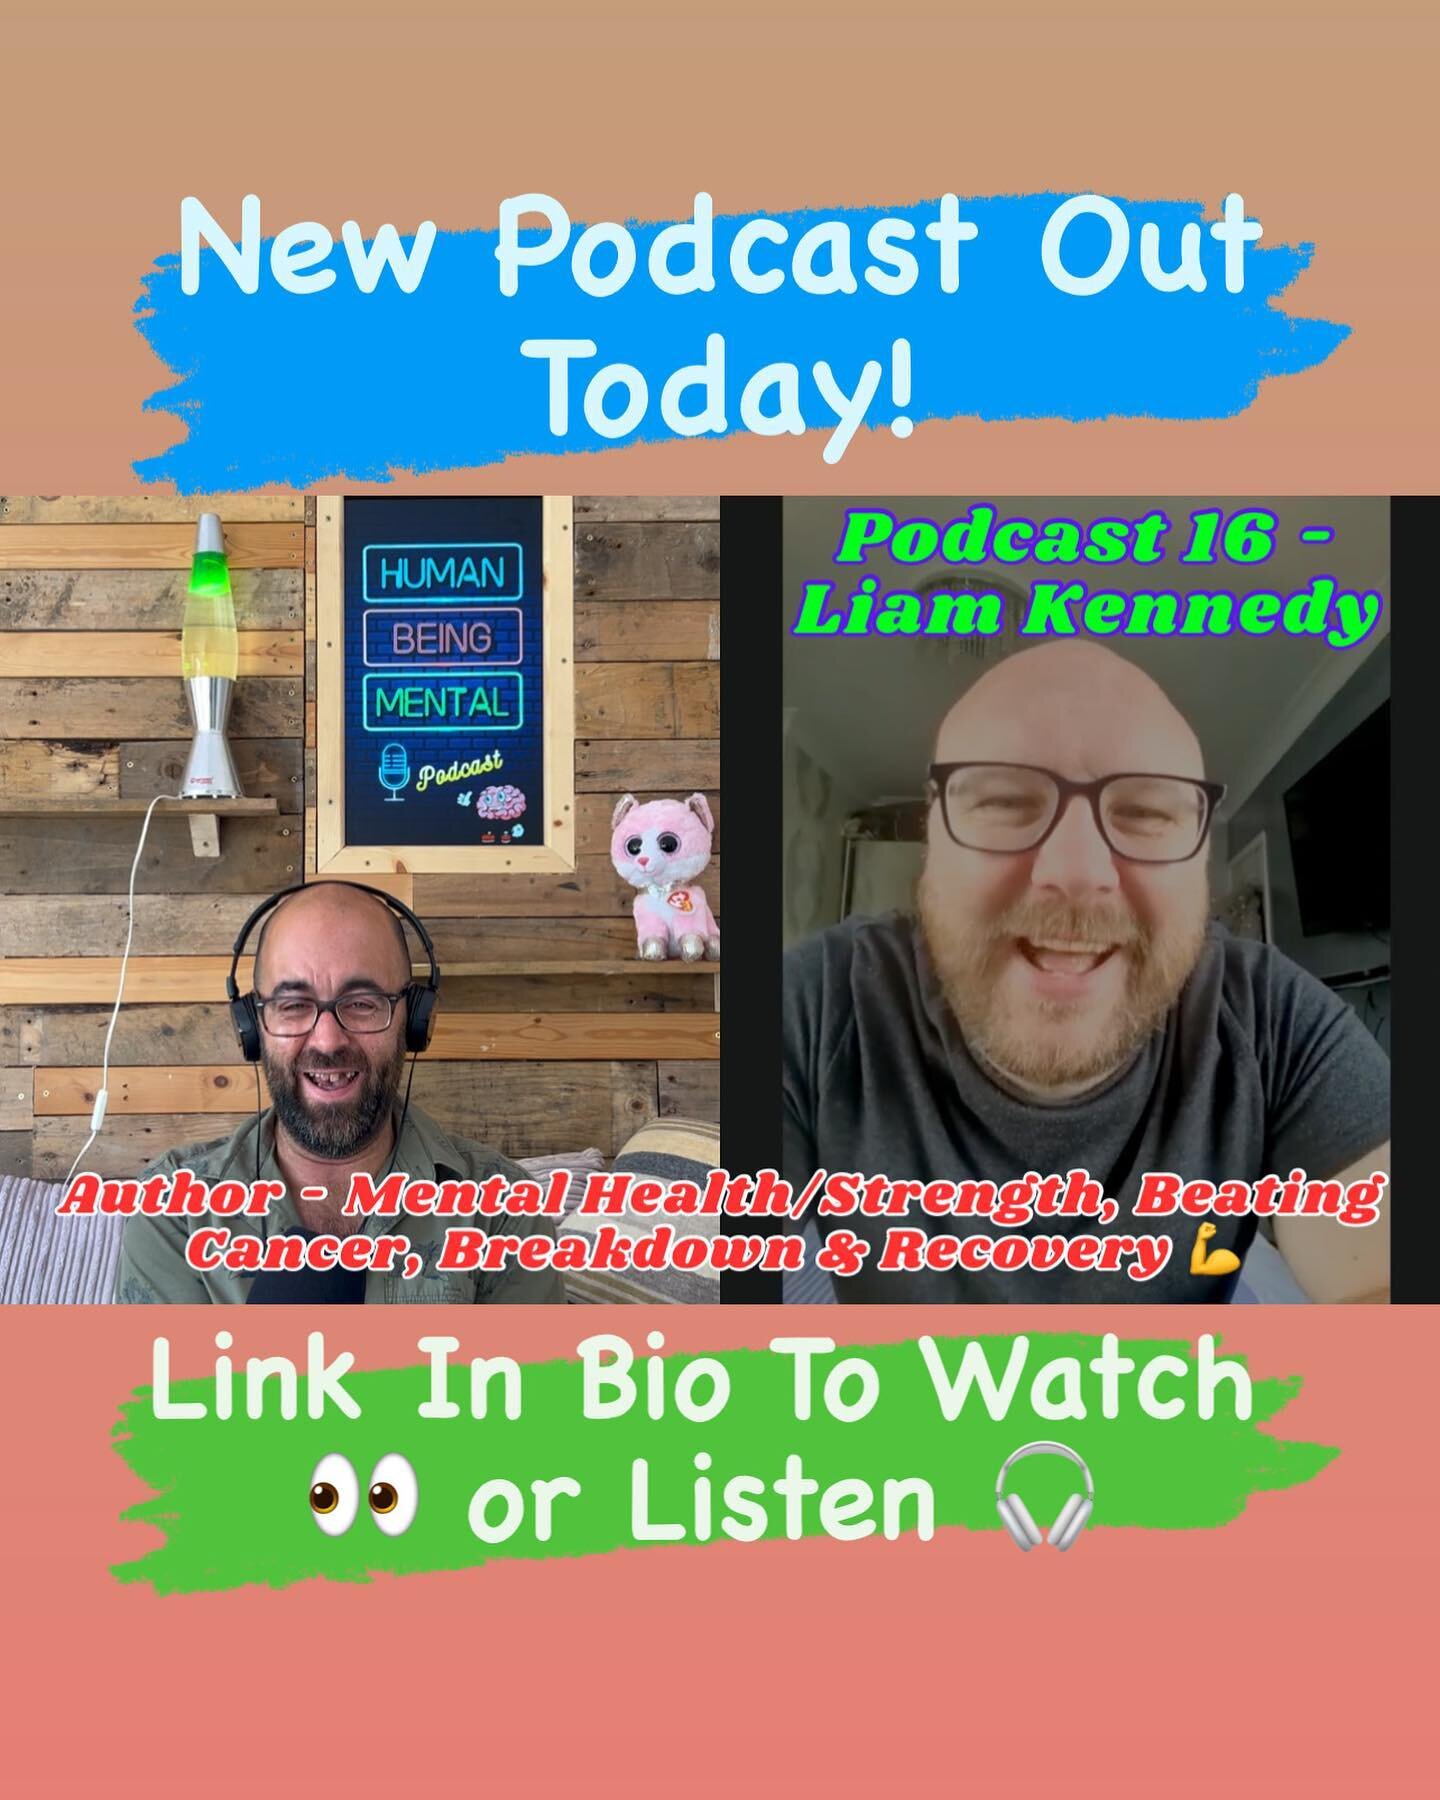 I&rsquo;m joined by Liam Kennedy, mental health warrior. We talk about Liam&rsquo;s struggle with physical and mental health and what led him to want to help other people who are struggling. We also talk about Liam&rsquo;s poetry, his social media vi